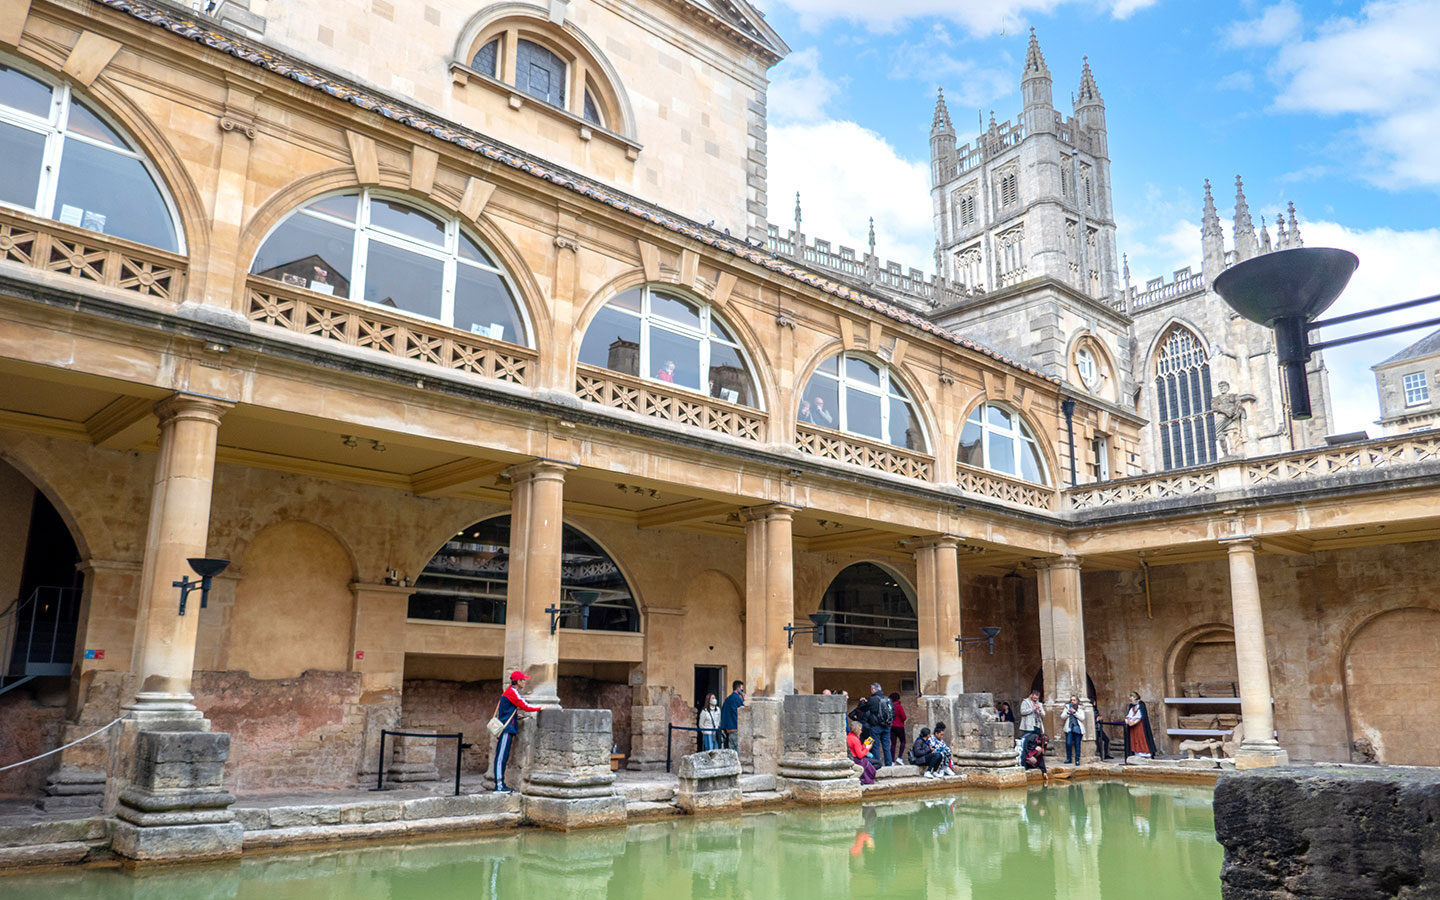 The Roman Baths and Temple of Sulis Minerva in Bath